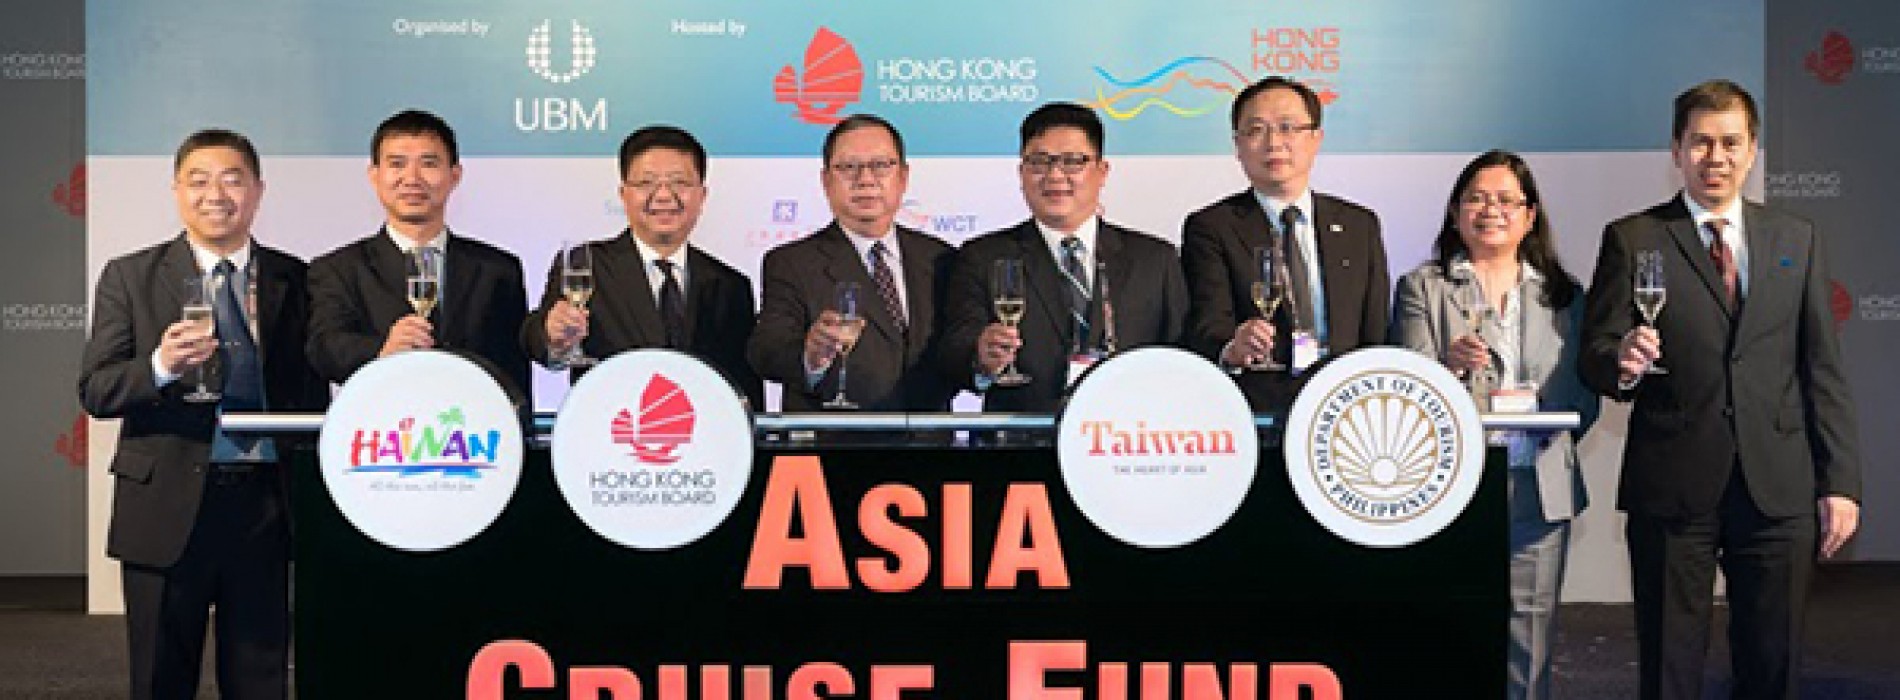 Asia Cruise Fund welcomes Hainan and The Philippines as new members